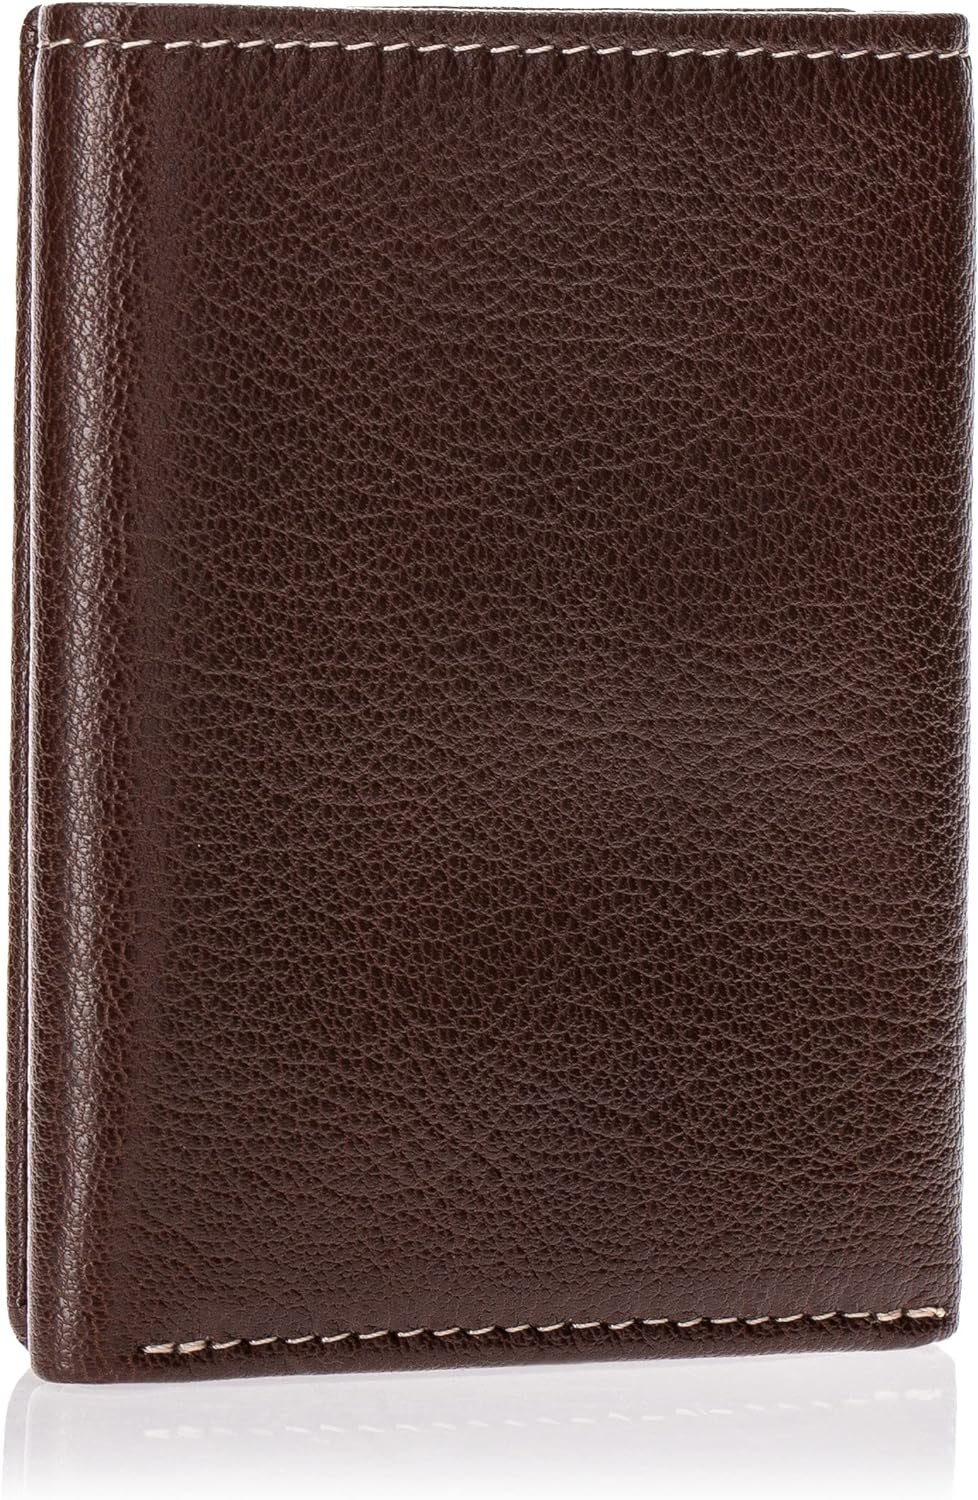 Timberland Men’s Leather Trifold Wallet with ID Window Review